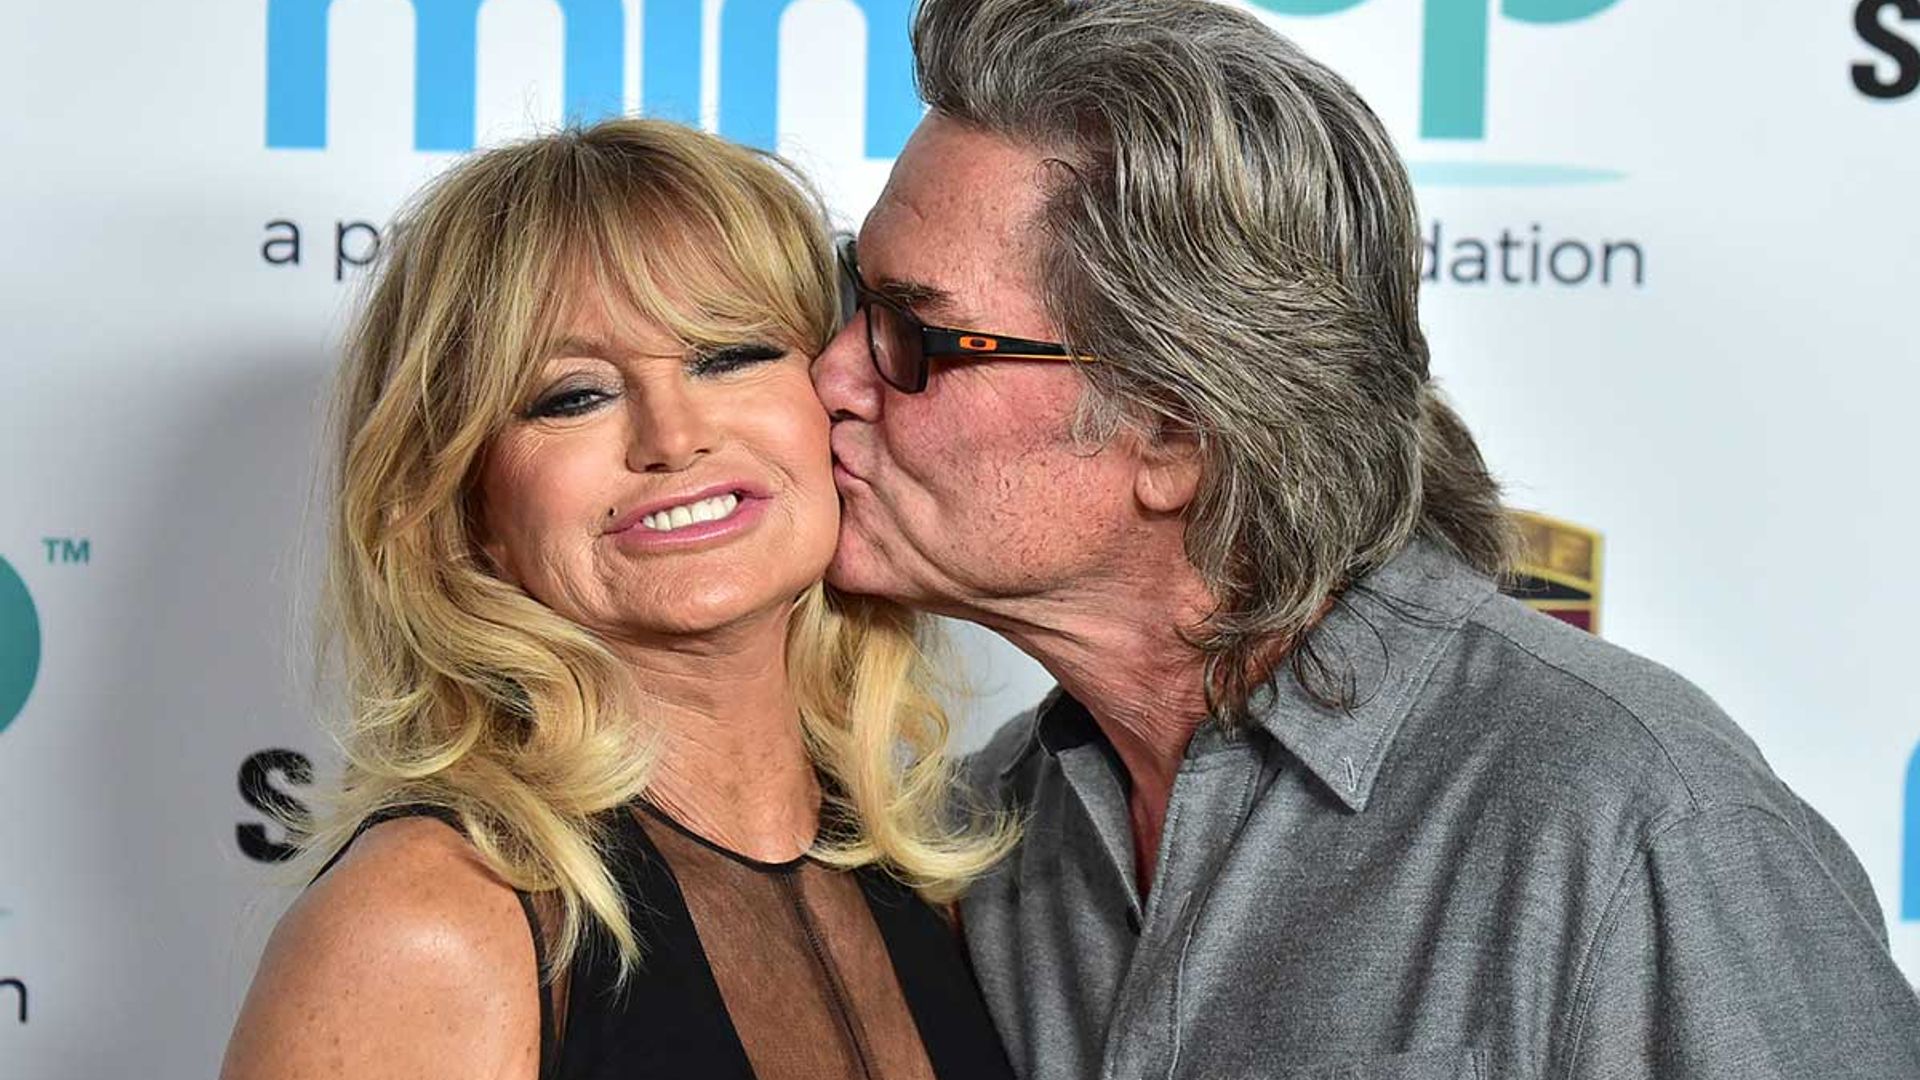 Goldie Hawn 76 Wows In Black Swimsuit In Sun Drenched Beach Photos Alongside Kurt Russell Hello